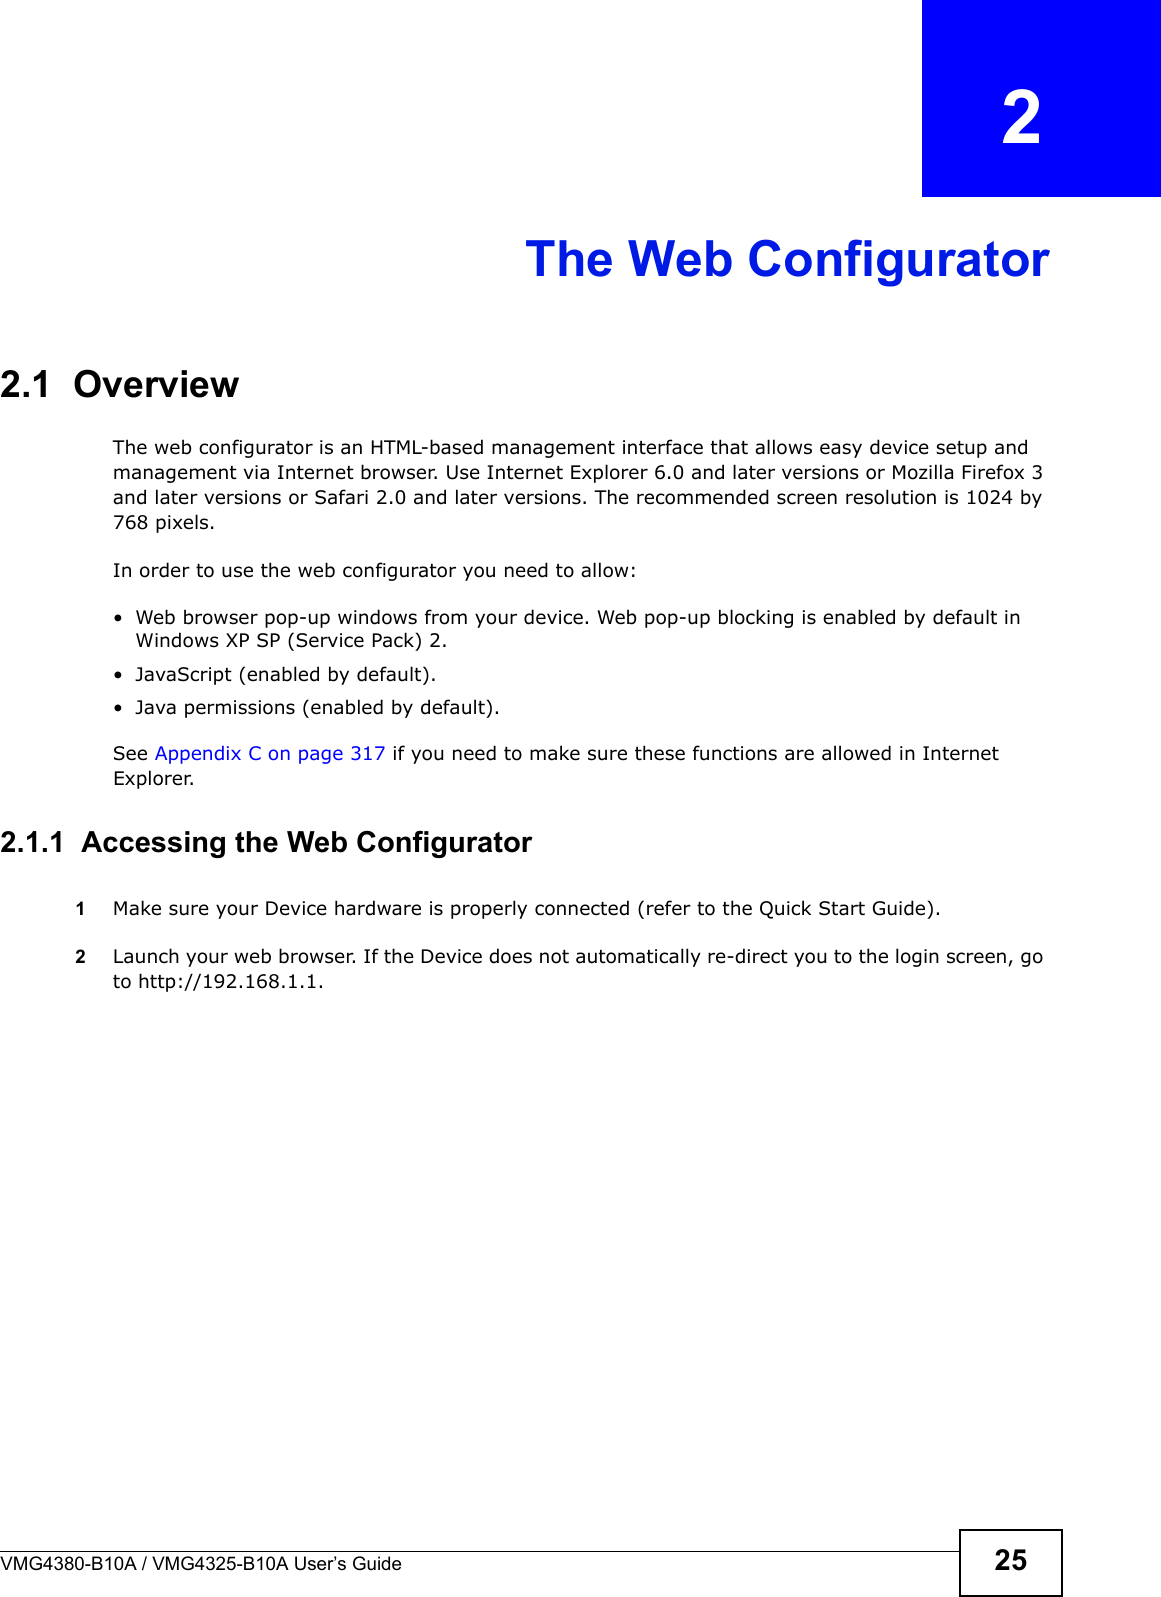 VMG4380-B10A / VMG4325-B10A User’s Guide 25CHAPTER  2The Web Configurator2.1  OverviewThe web configurator is an HTML-based management interface that allows easy device setup and management via Internet browser. Use Internet Explorer 6.0 and later versions or Mozilla Firefox 3 and later versions or Safari 2.0 and later versions. The recommended screen resolution is 1024 by 768 pixels.In order to use the web configurator you need to allow:• Web browser pop-up windows from your device. Web pop-up blocking is enabled by default inWindows XP SP (Service Pack) 2.• JavaScript (enabled by default).• Java permissions (enabled by default).See Appendix C on page 317 if you need to make sure these functions are allowed in InternetExplorer.2.1.1  Accessing the Web Configurator1Make sure your Device hardware is properly connected (refer to the Quick Start Guide).2Launch your web browser. If the Device does not automatically re-direct you to the login screen, go to http://192.168.1.1.